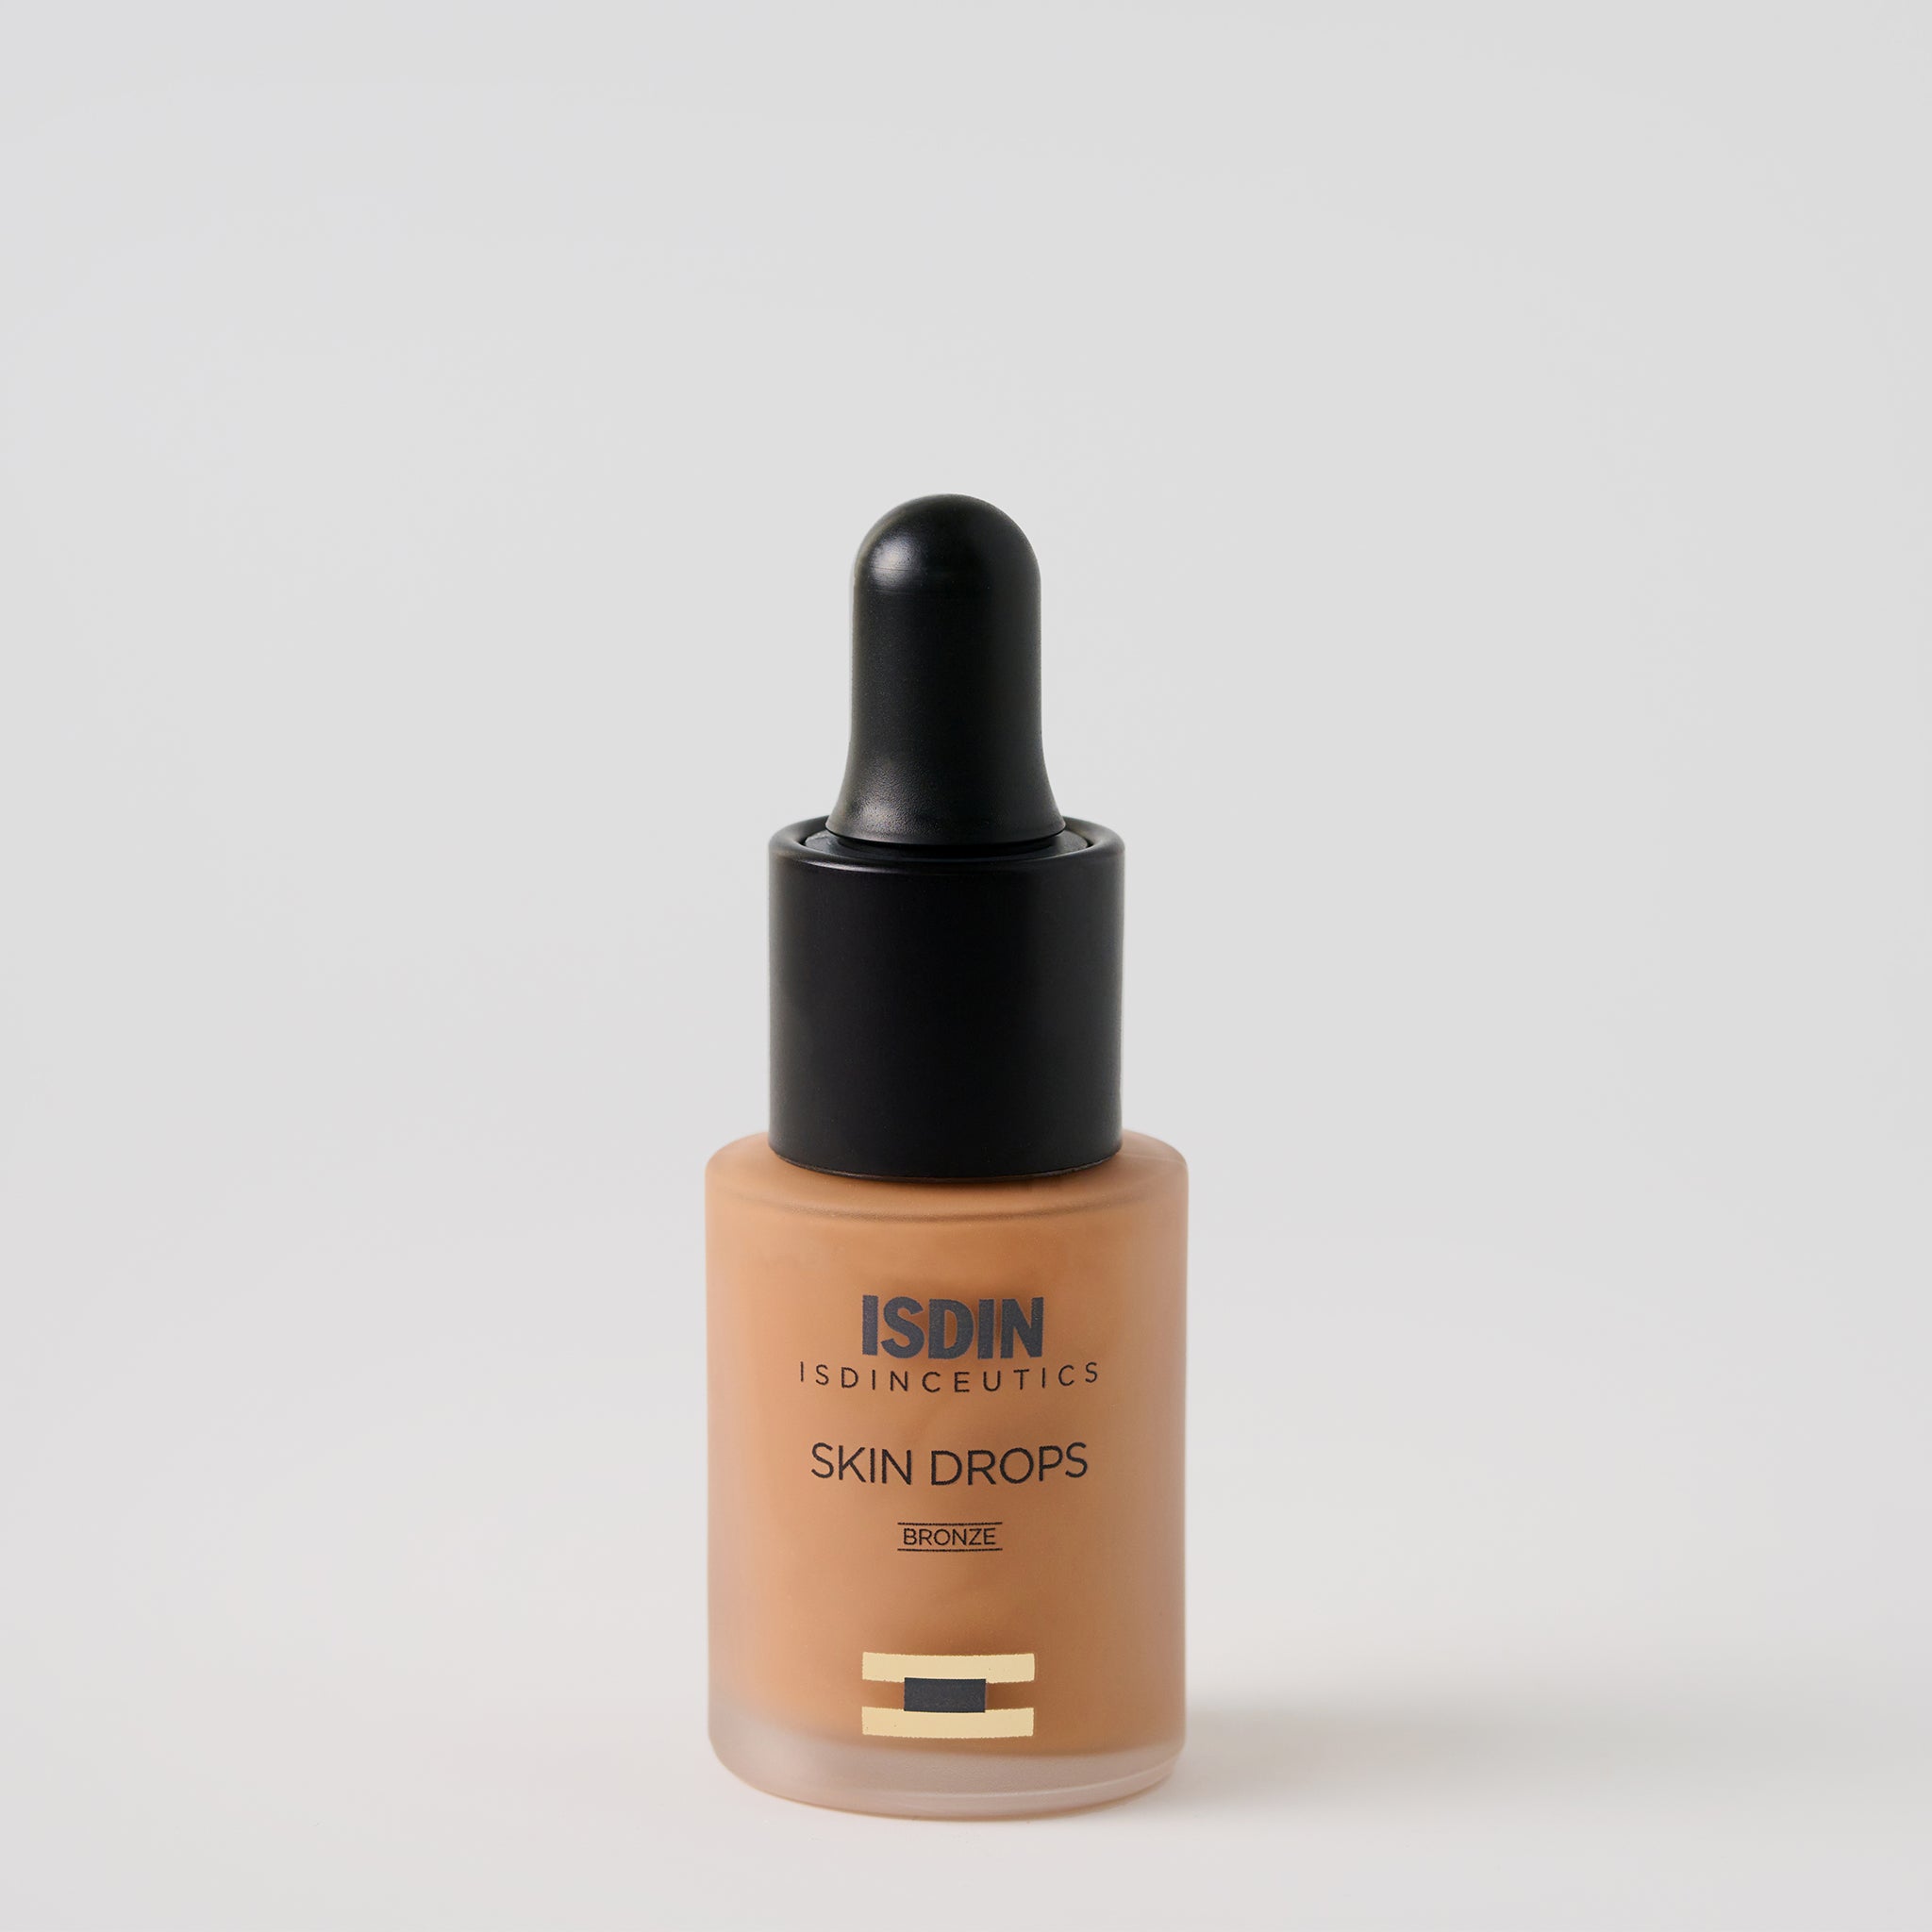 ISDIN Skin Drops, Face and Body Makeup  